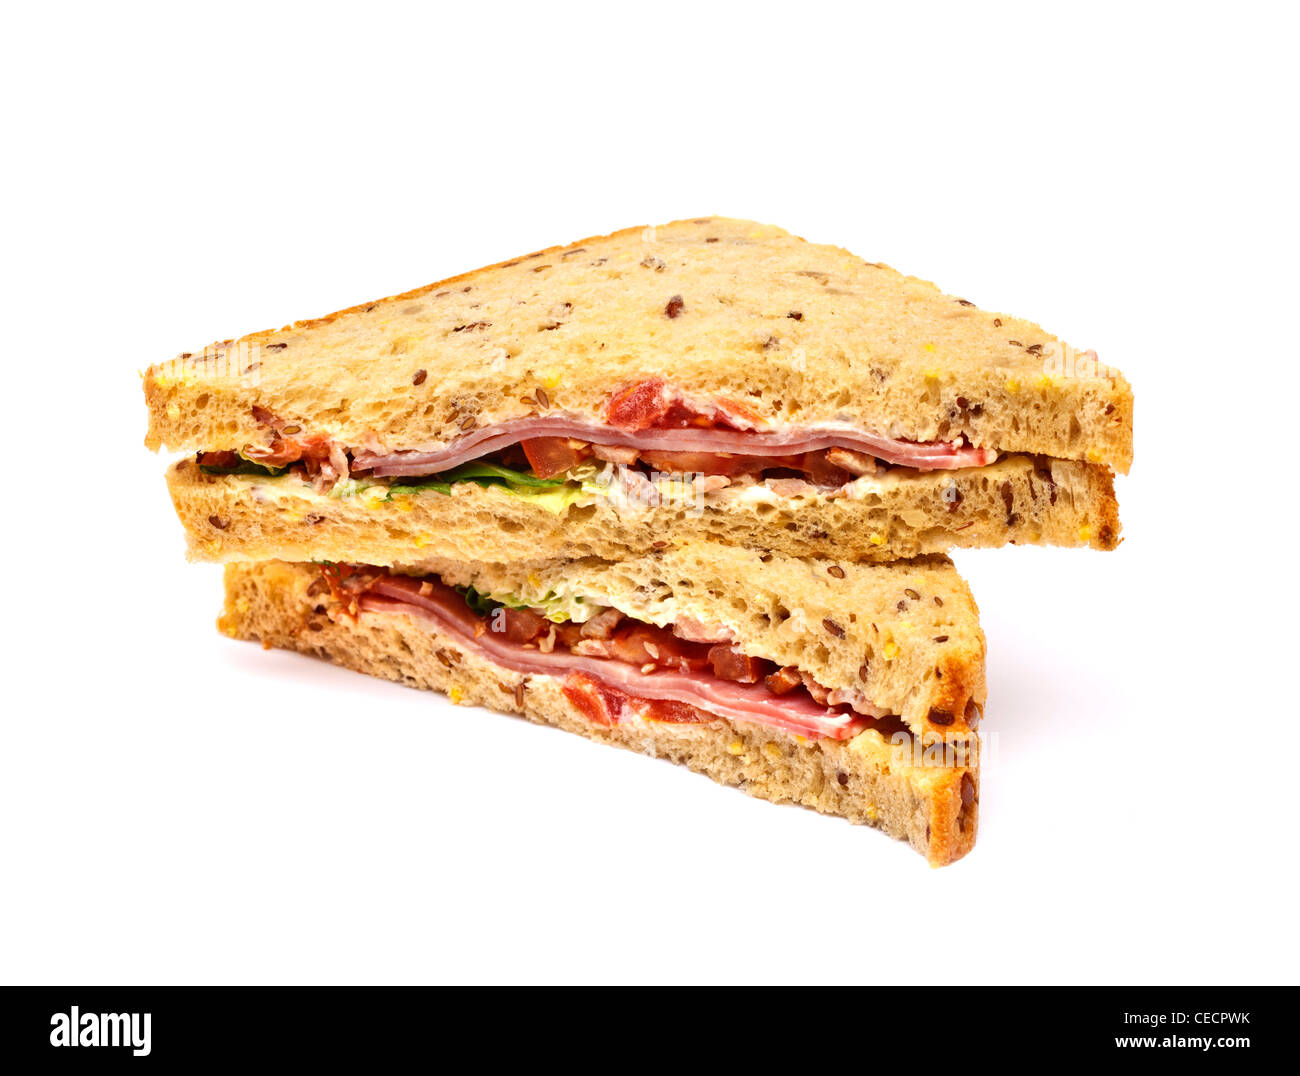 BLT - bacon, lettuce and tomato sandwich on white background Stock Photo